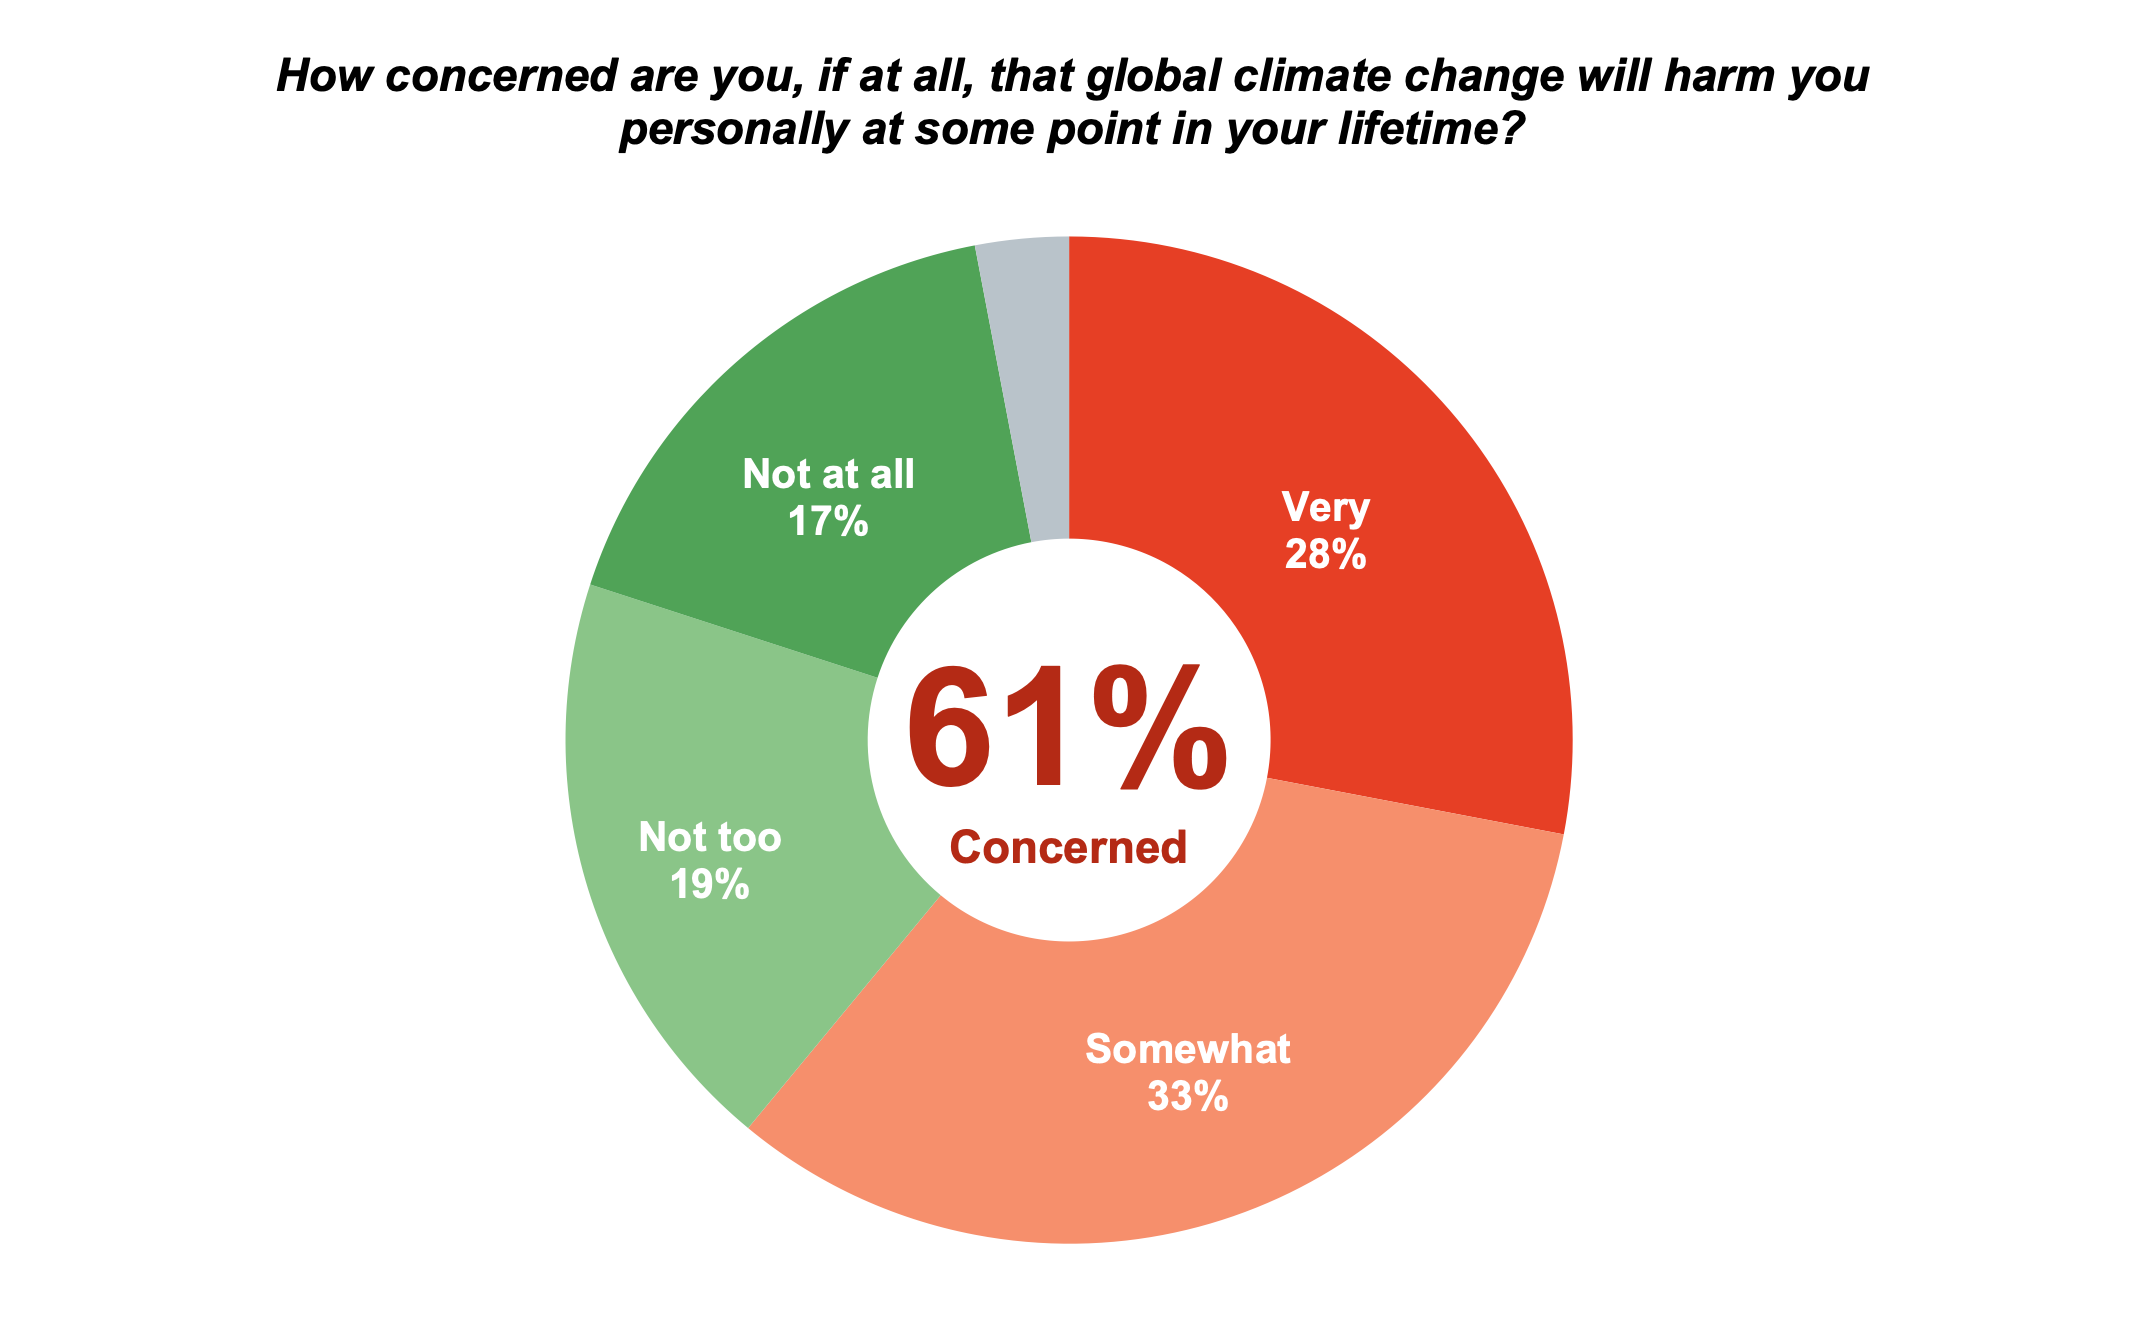 Pie chart results from asking Oregon residents how concerned they are, if at all, that global climate change will harm them personally at some point in their lifetime.